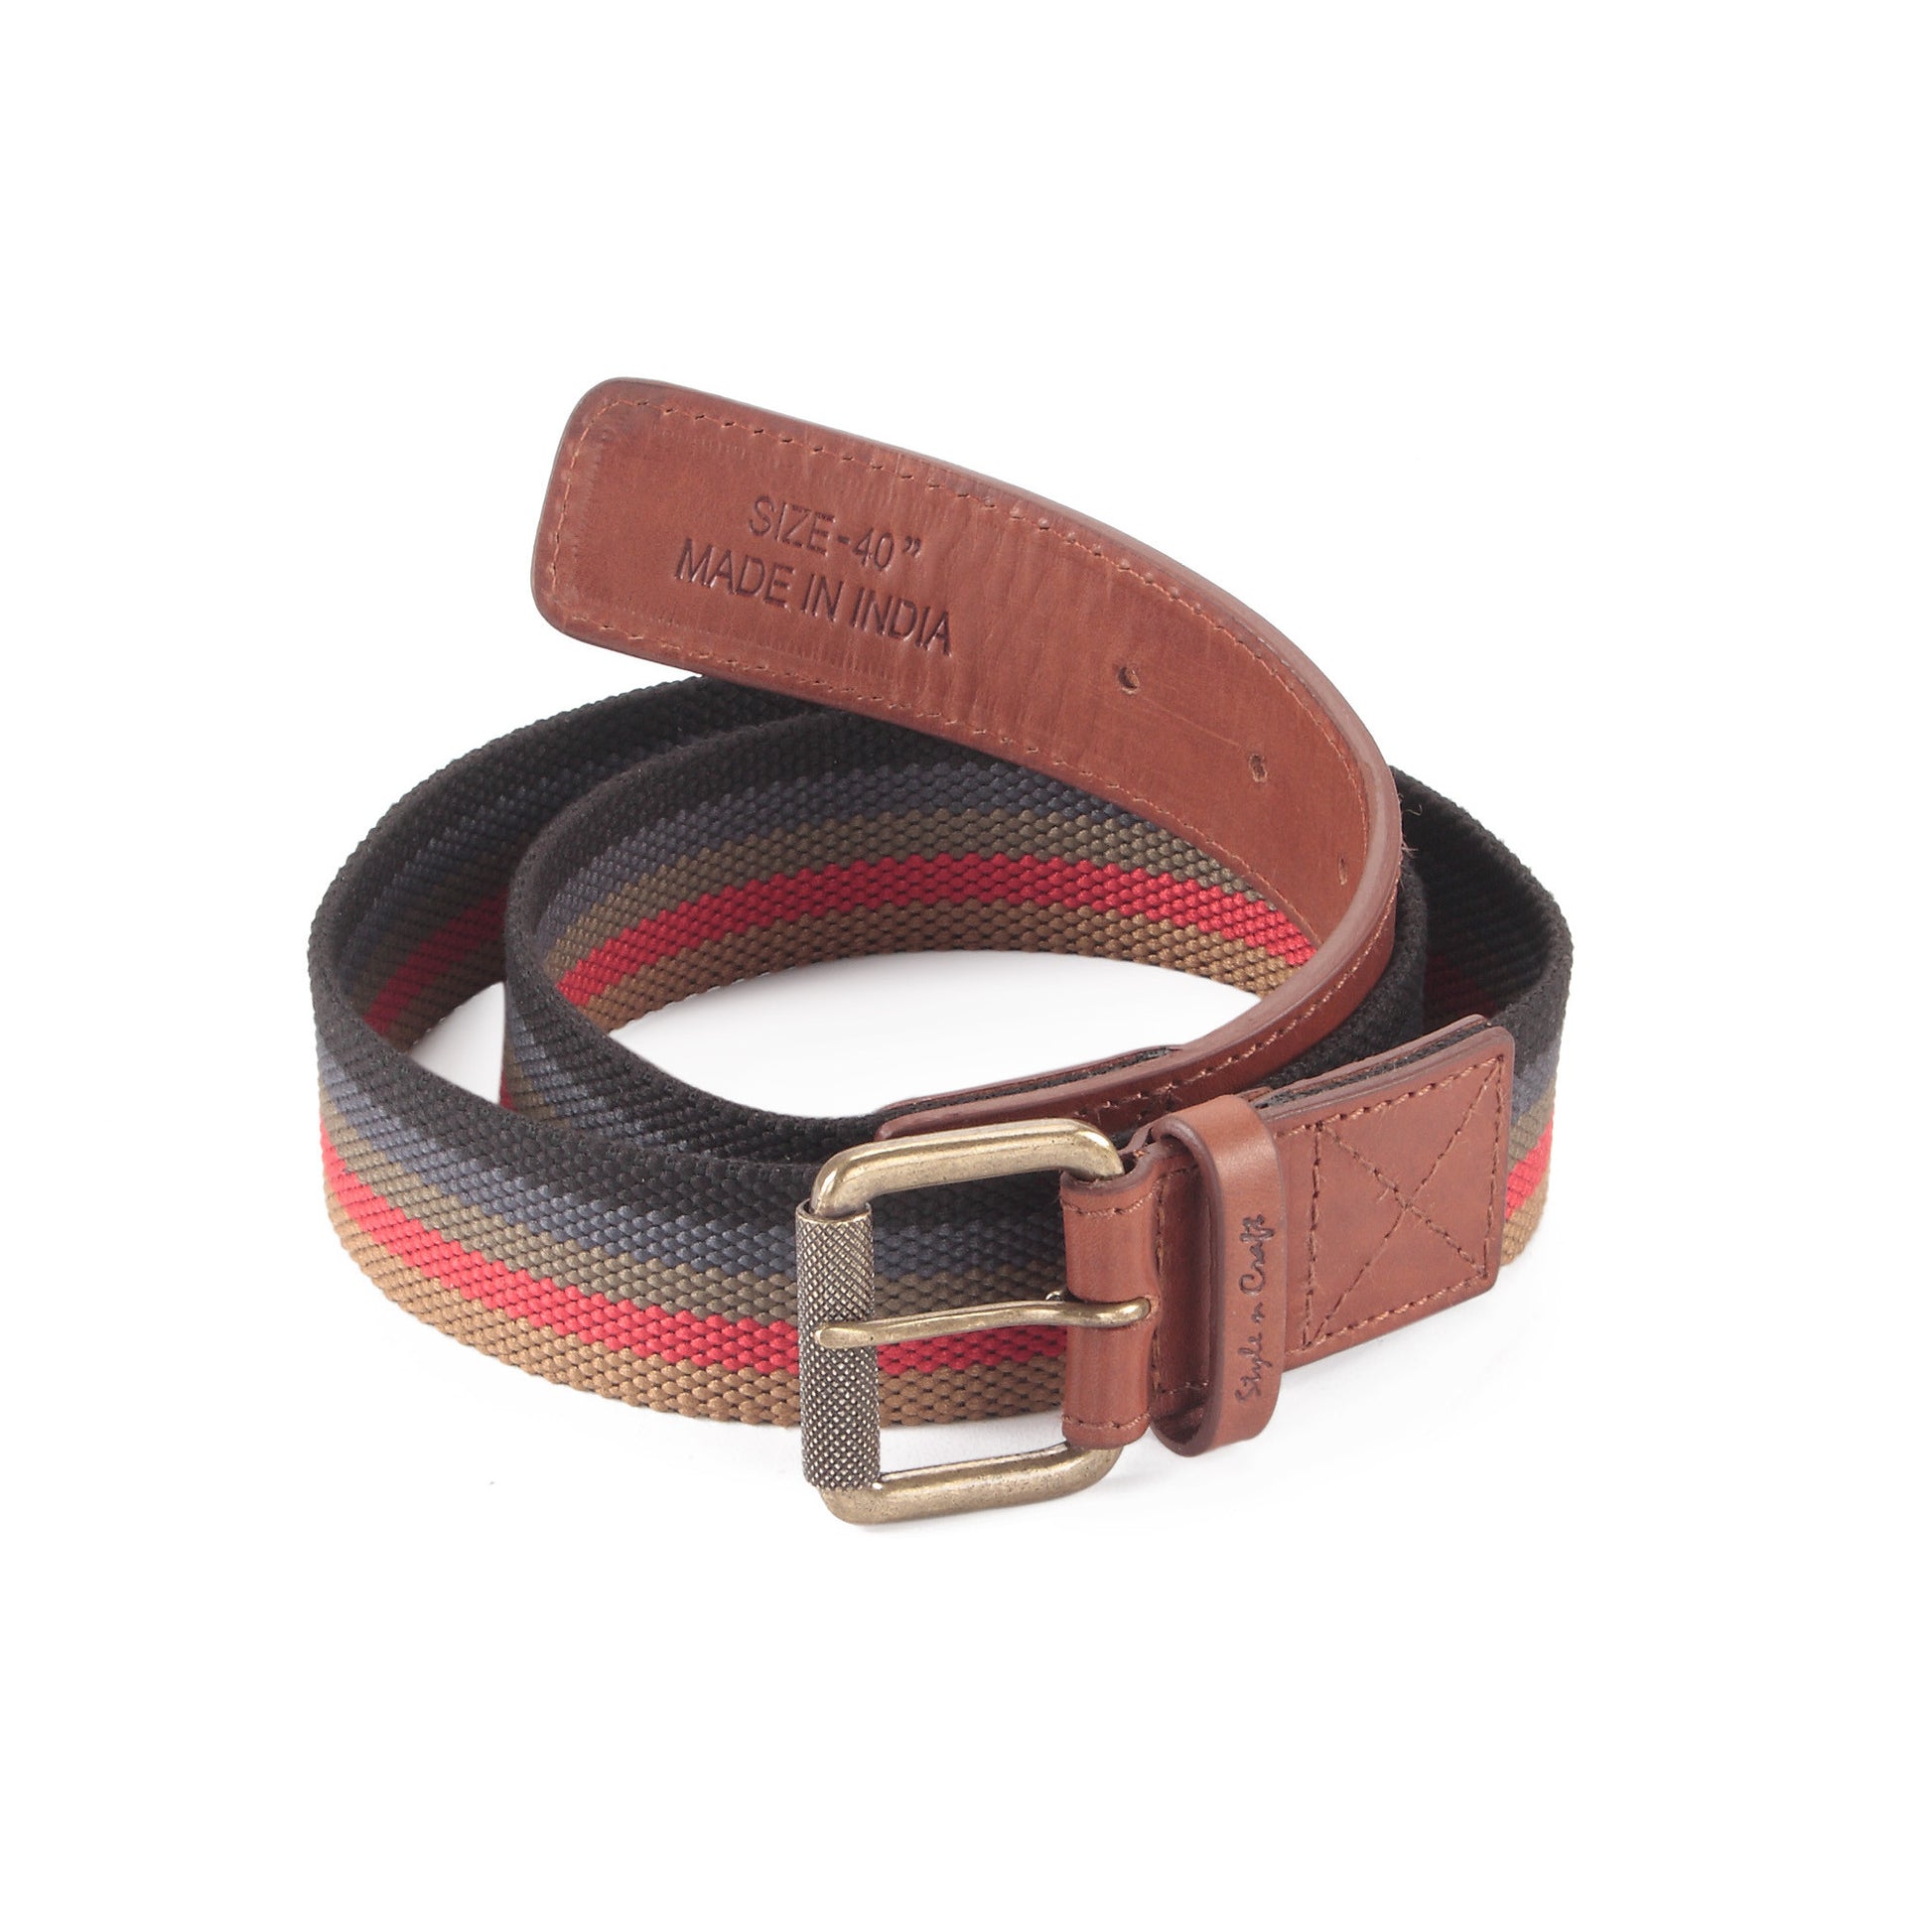 390190 - One and a Half Inch Wide Leather Webbing Combination Belt - brandy color leather - front view